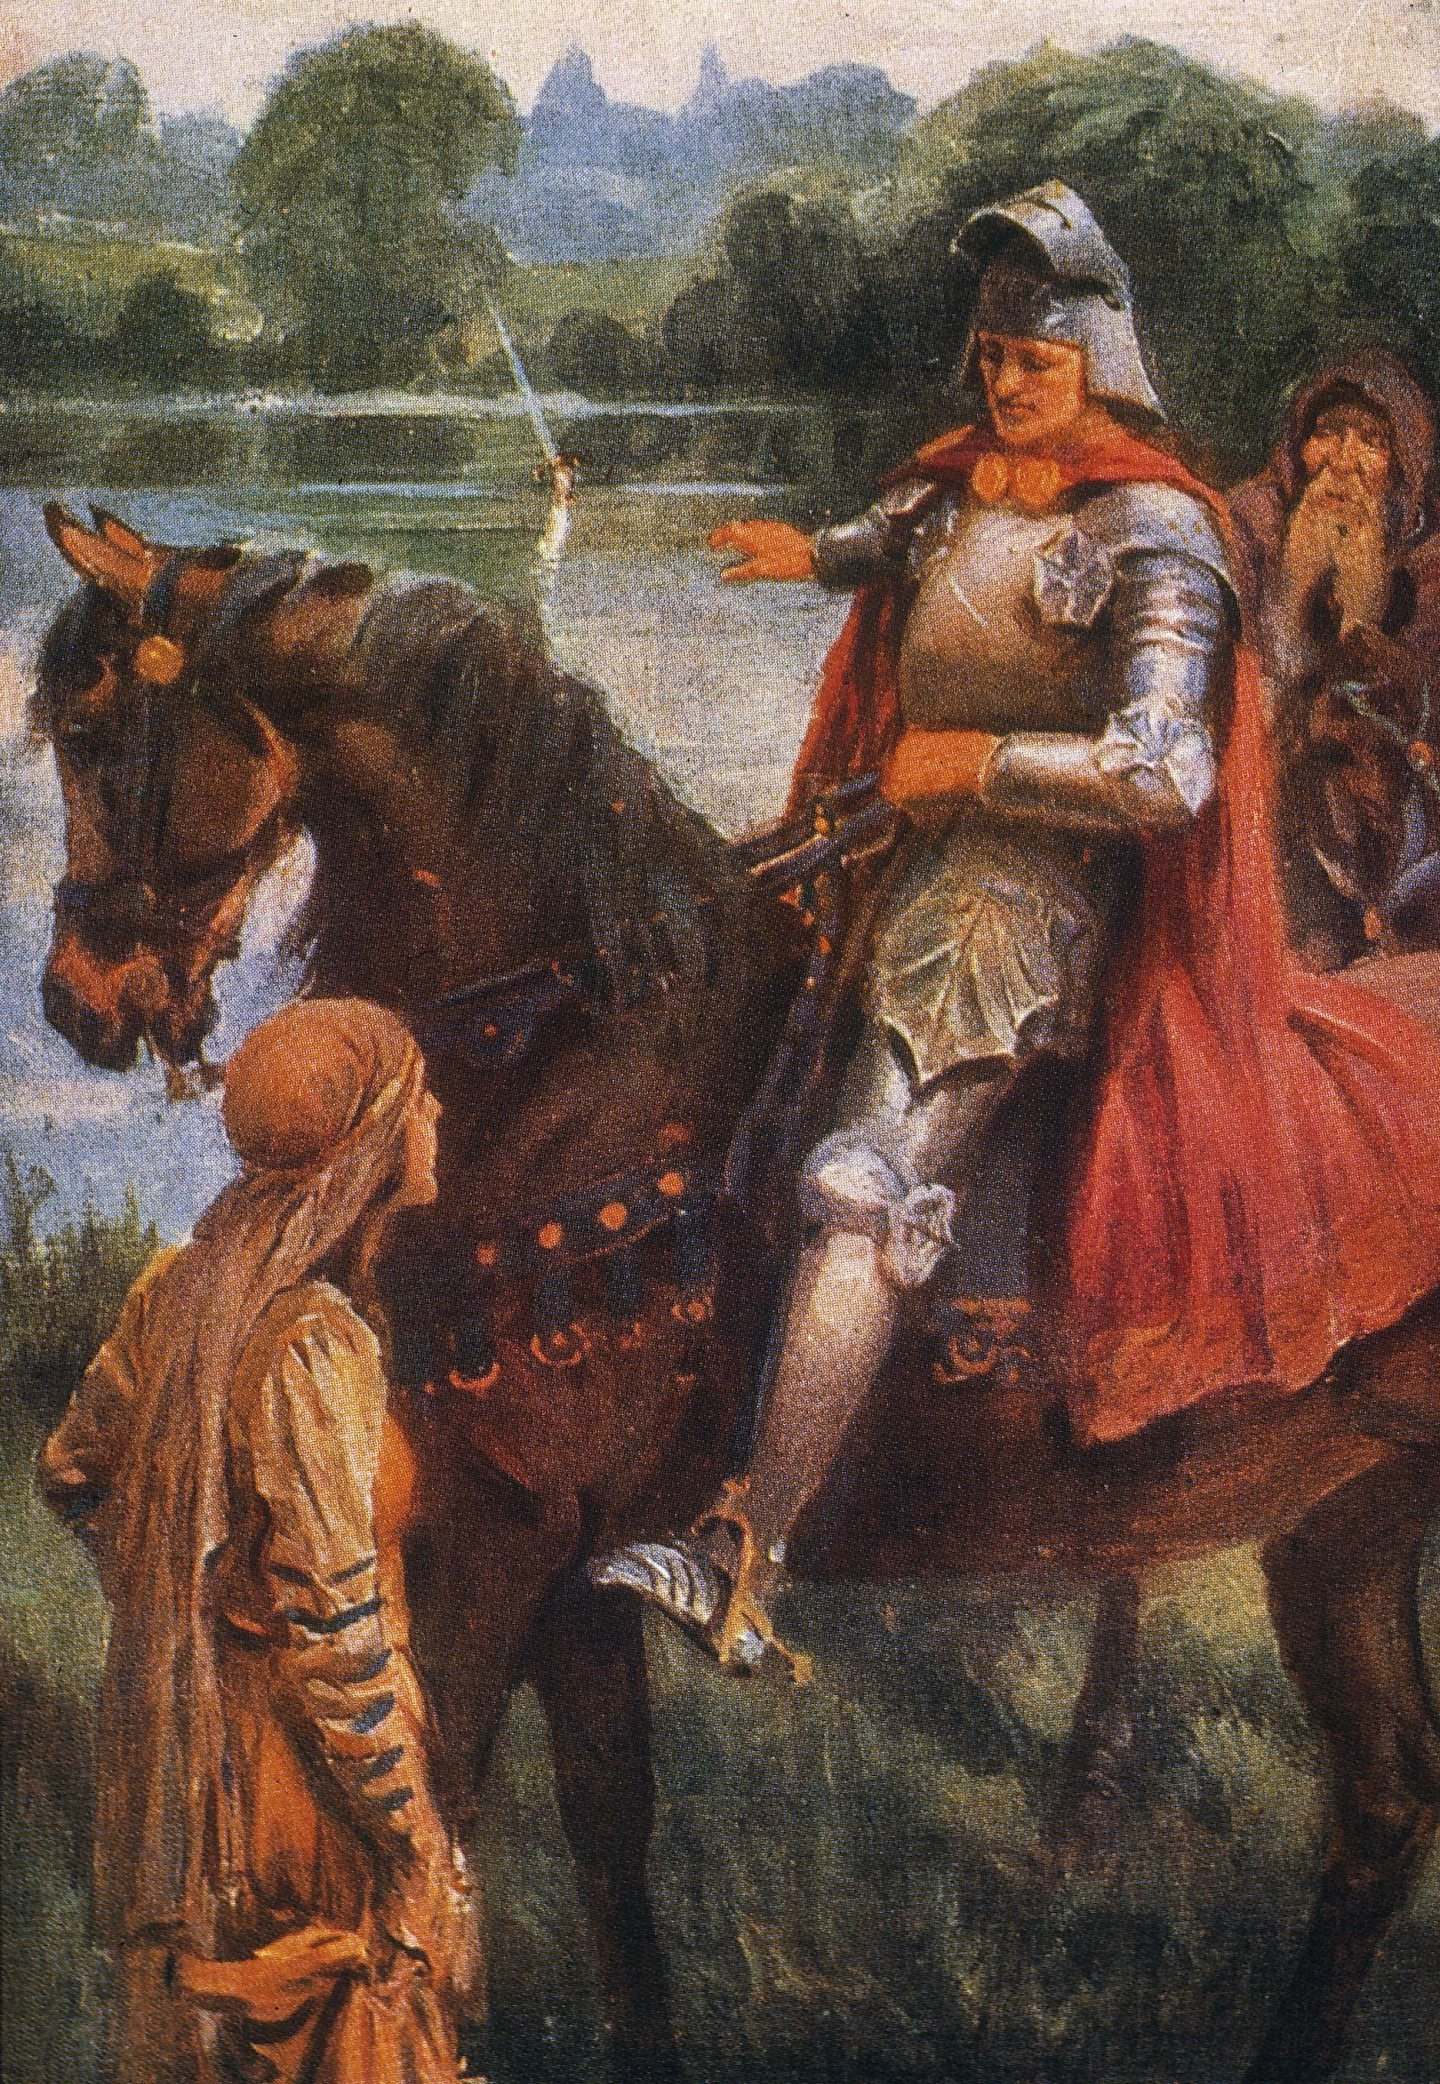 Illustration from a 1923 edition Of King Arthur and his Knights, showing a knight on horseback and a sword emerging from a lake 